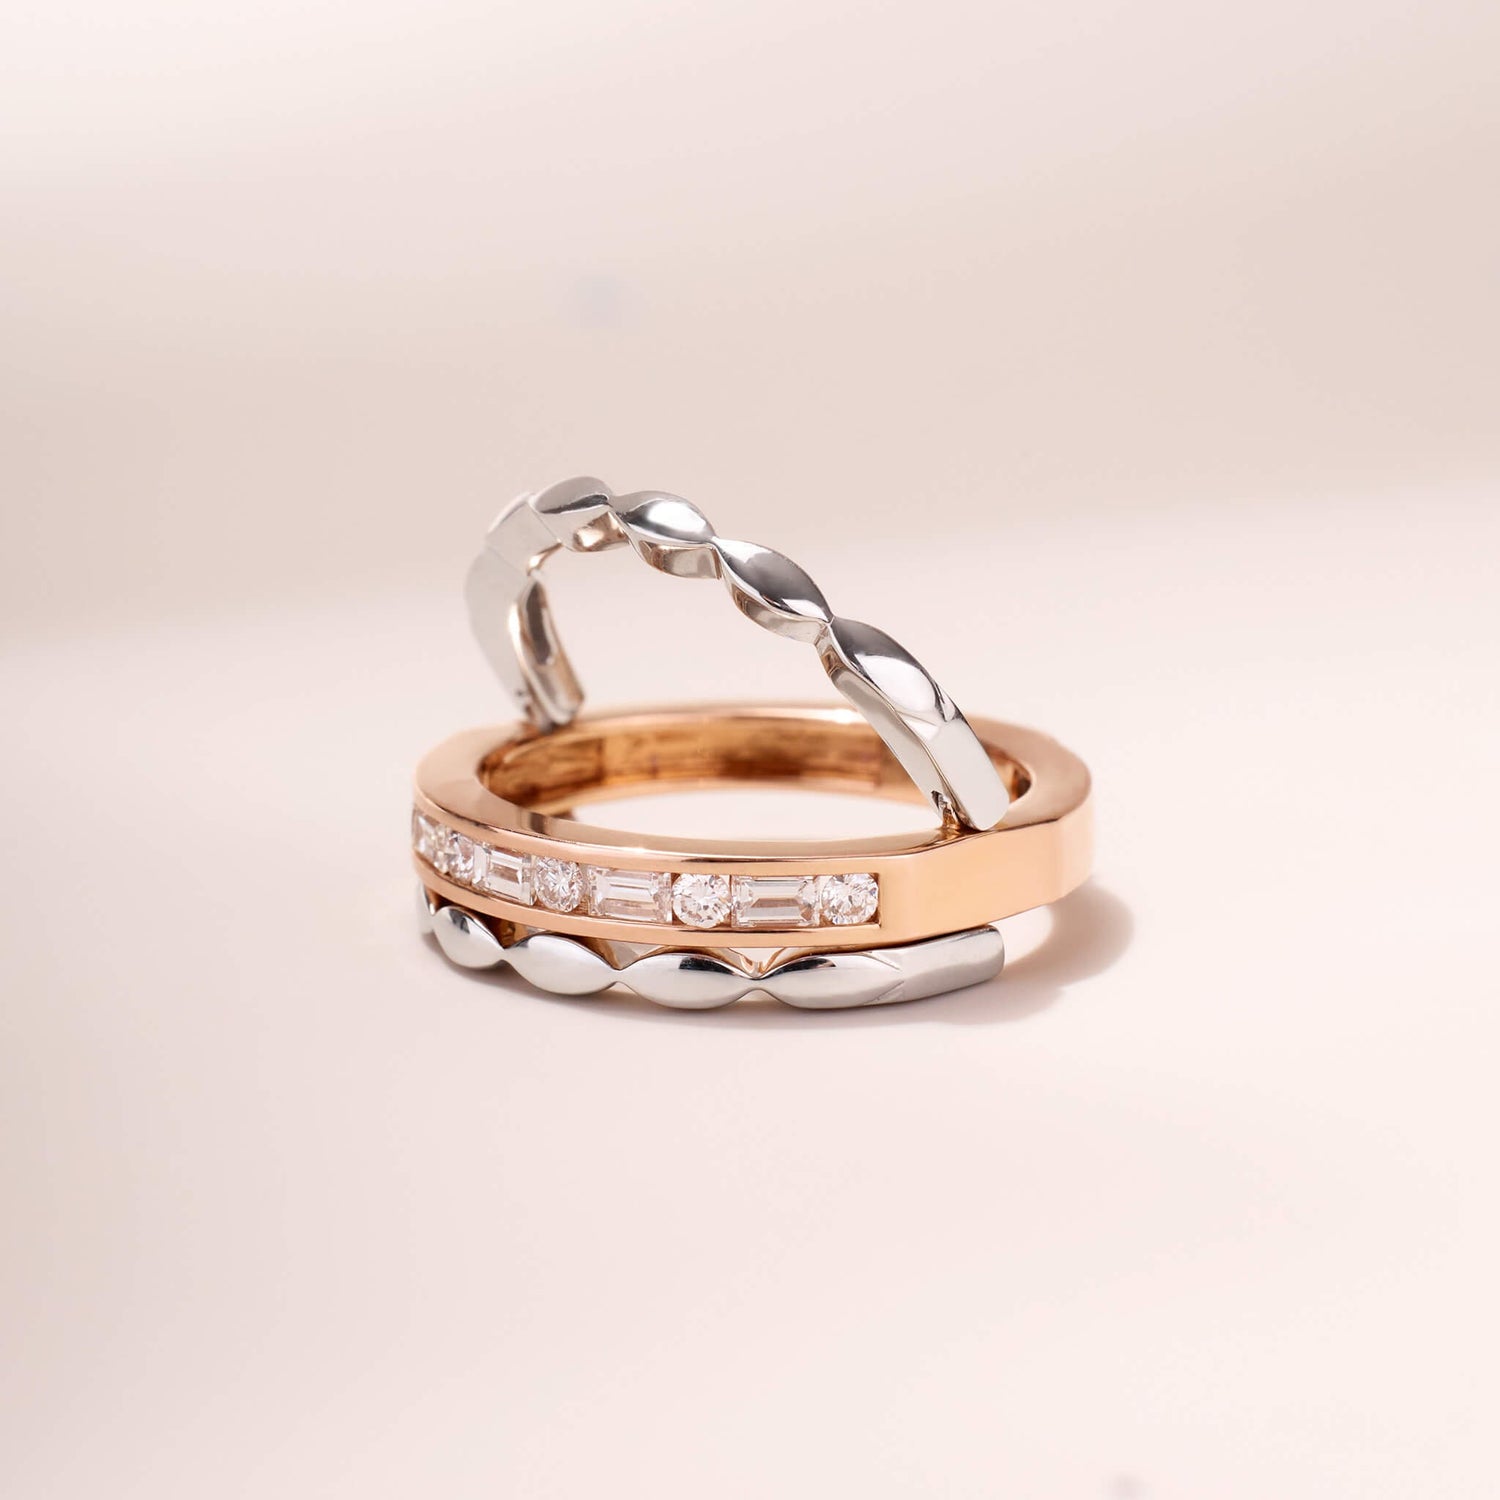 Two-Flips Diamond Ring（1 Rings with 6 Styles)